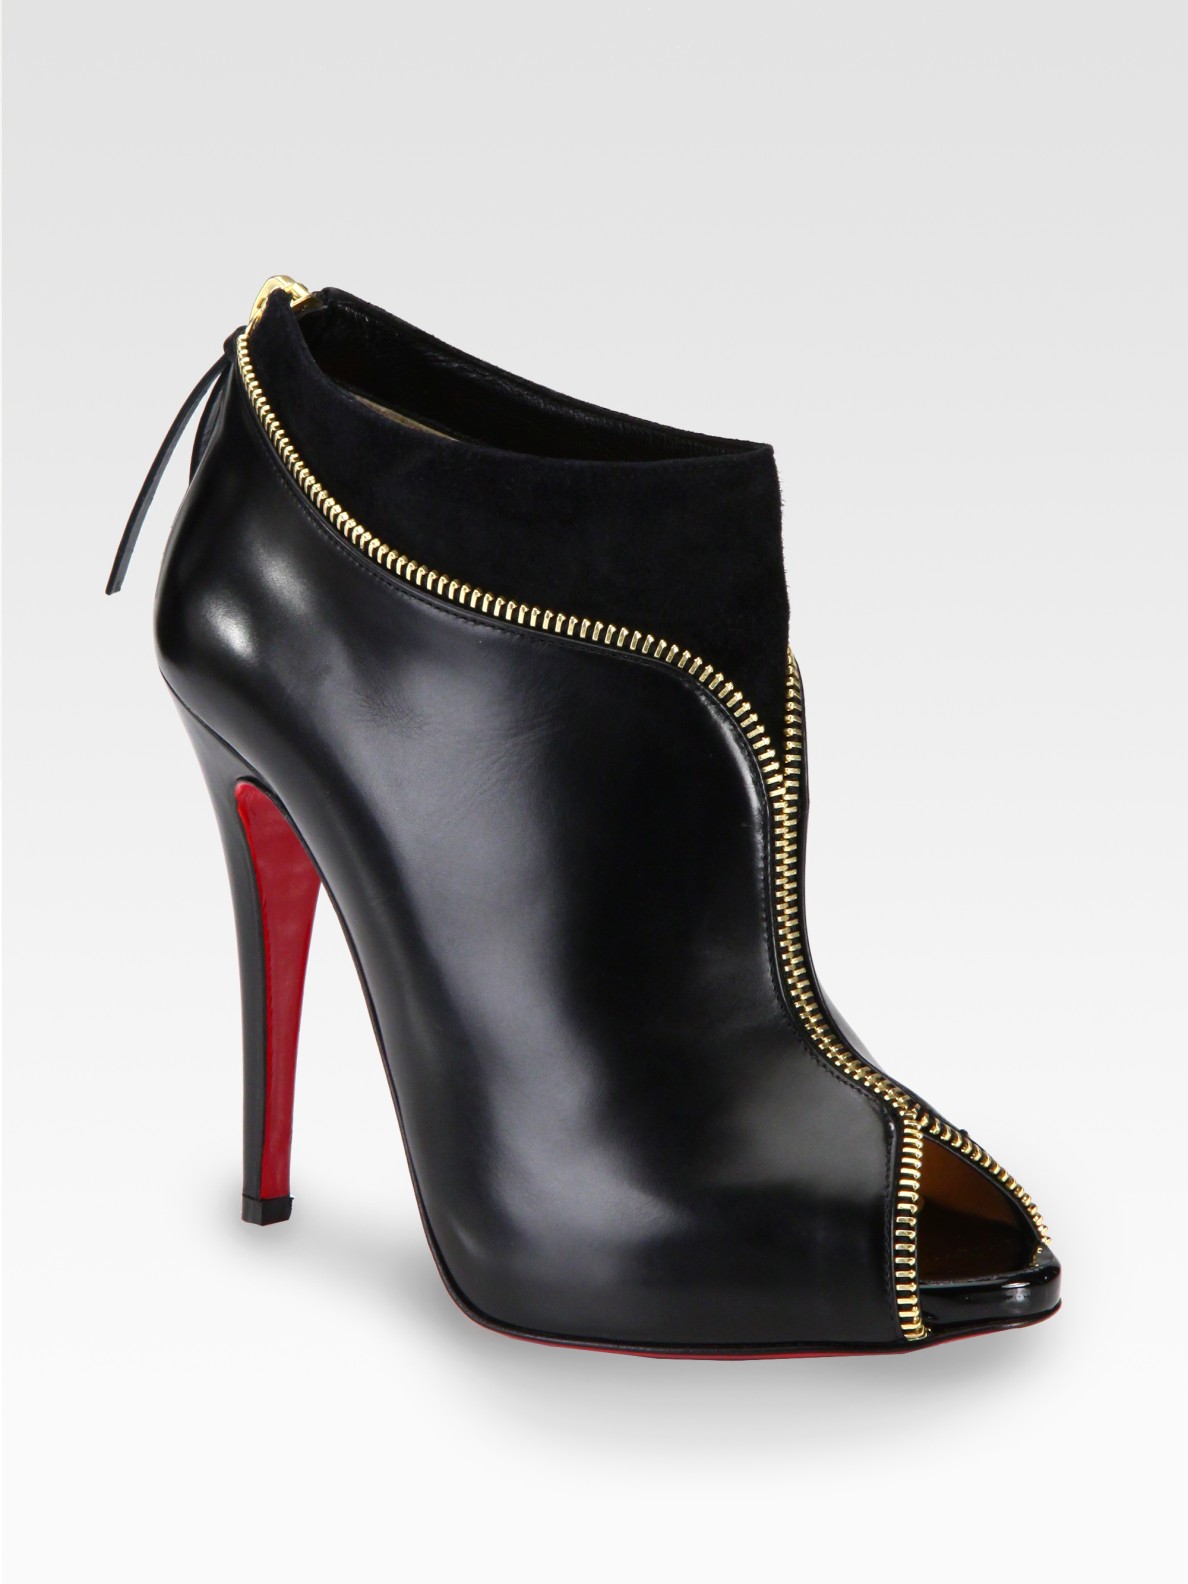 Christian Louboutin Suede Zipper Ankle Boots in Black | Lyst